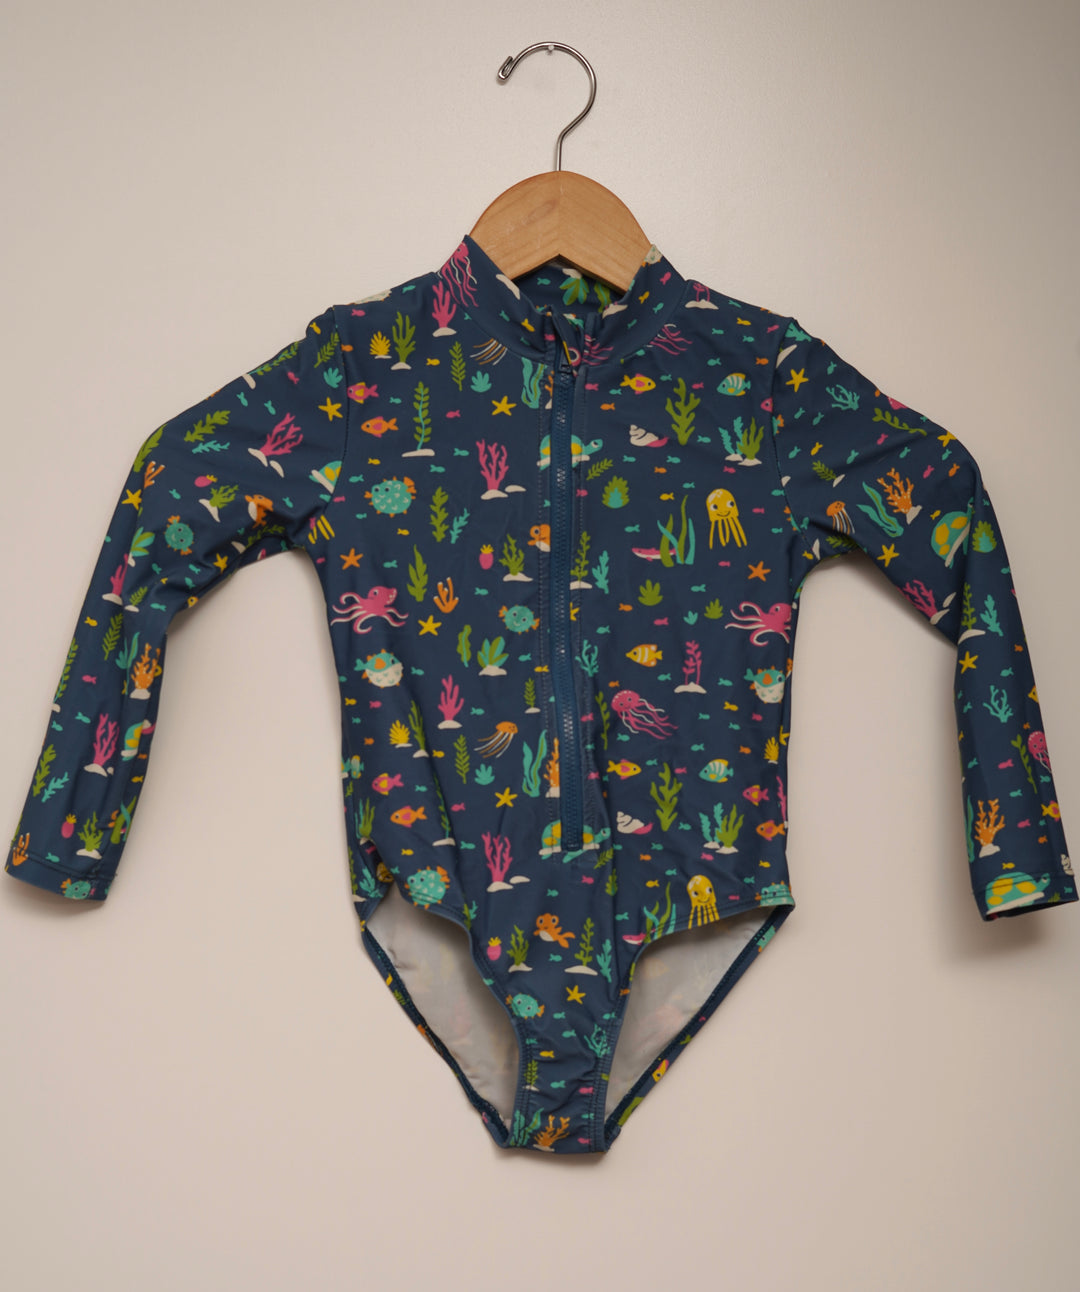 Frugi One Piece Swimsuit 4-5 Years